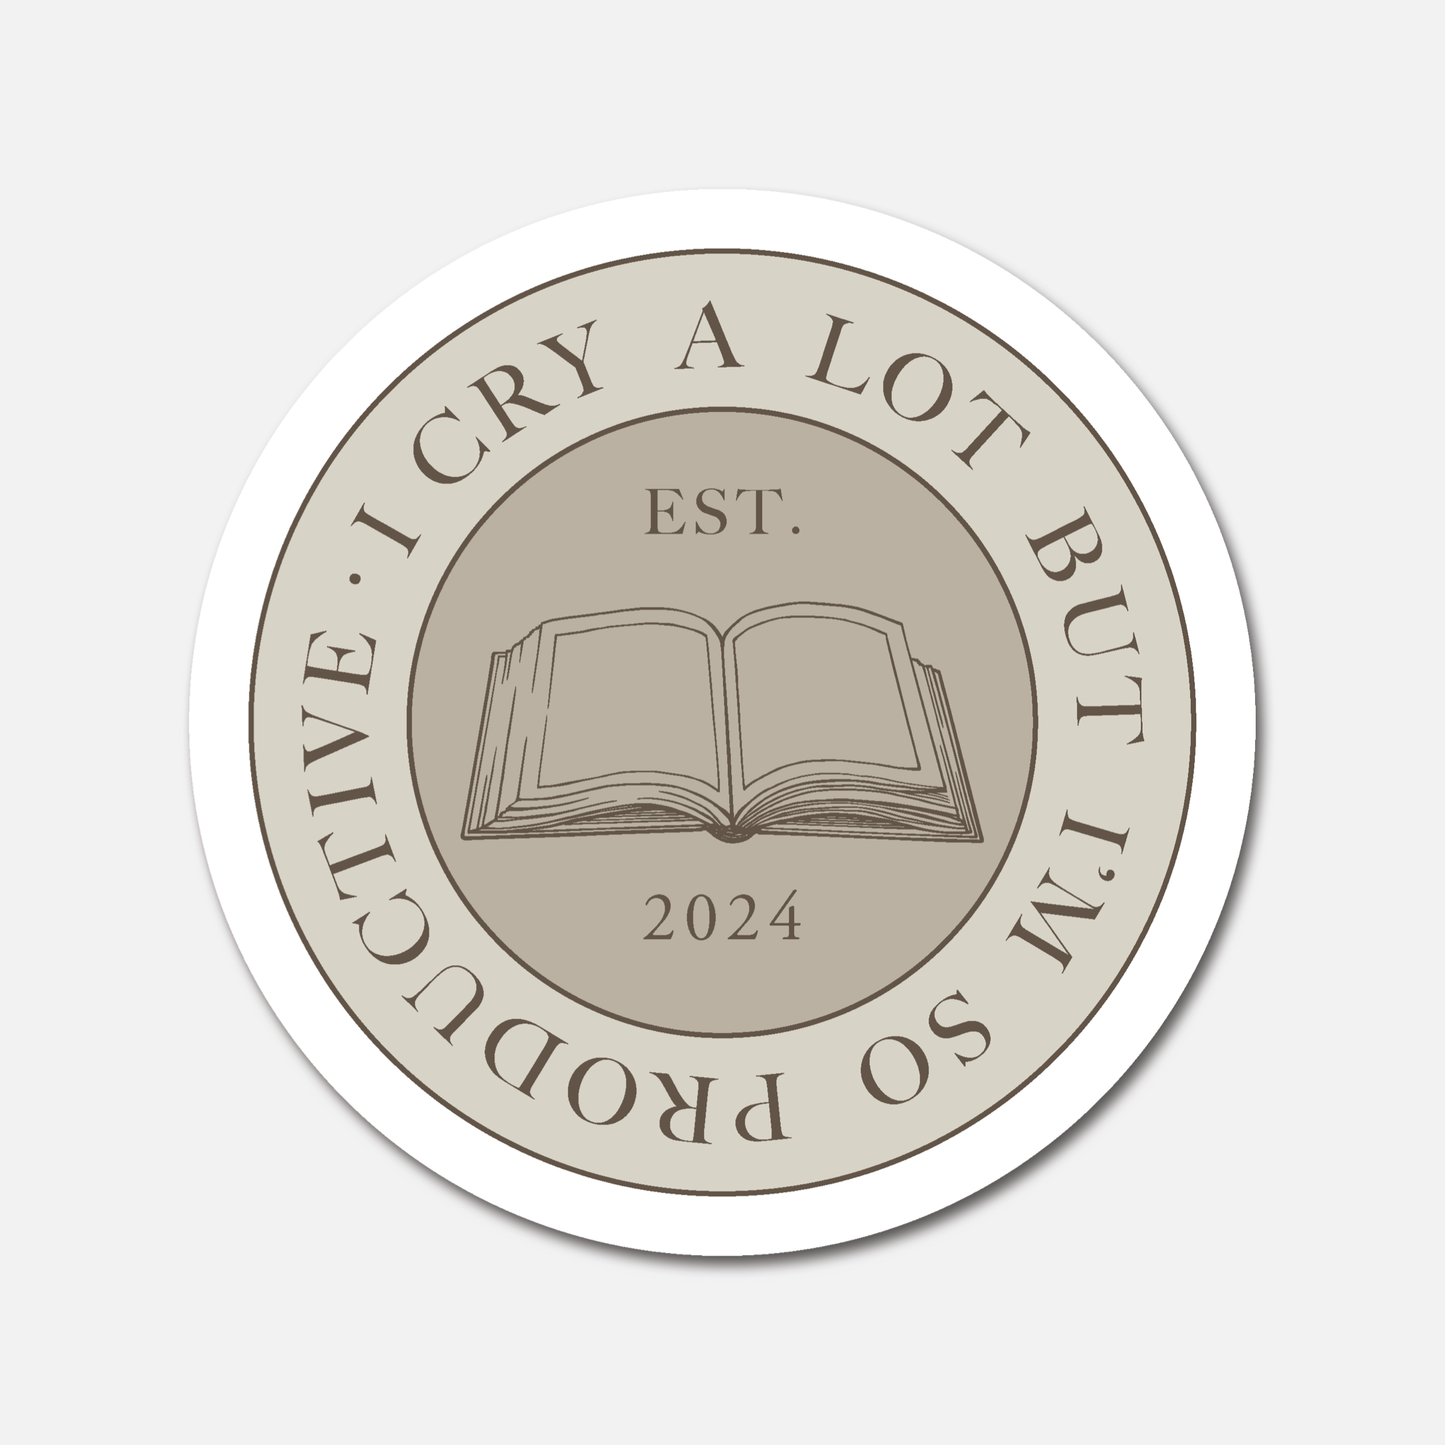 I Cry A Lot - TTPD Coin - The Tortured Poets Department  - Taylor Swift Sticker